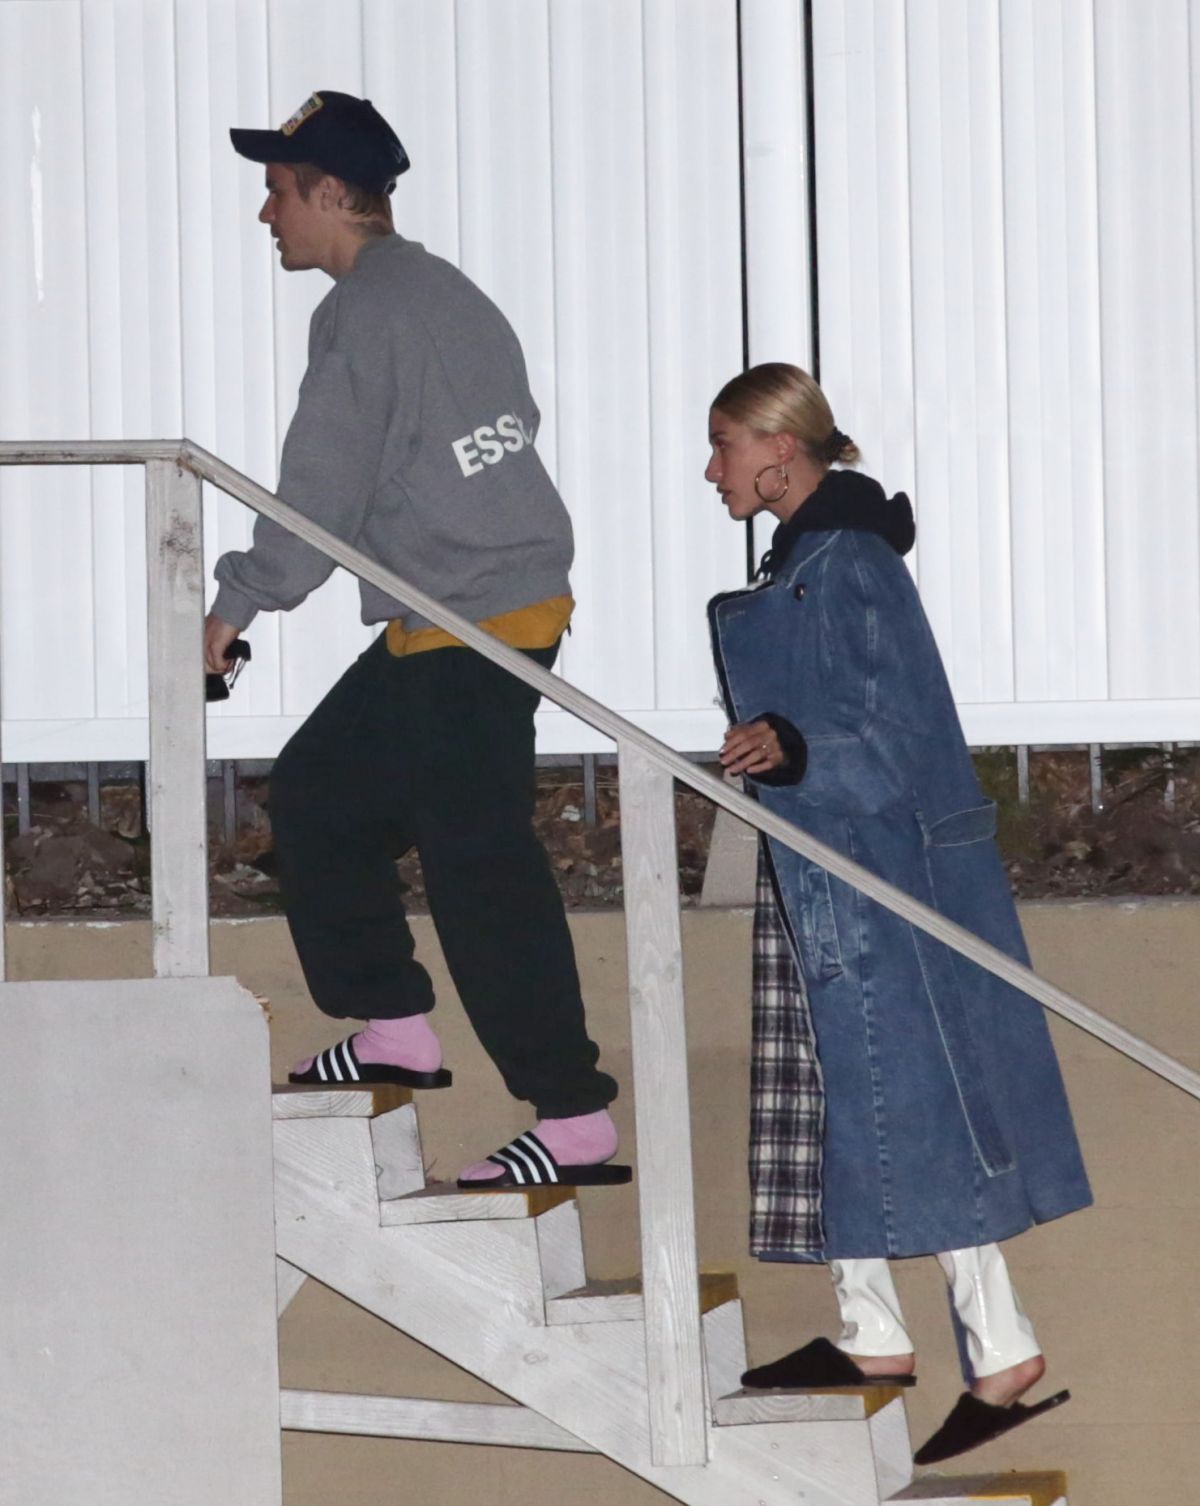 hailey-and-justin-bieber-night-out-in-los-angeles-03-20-2019-1.jpg